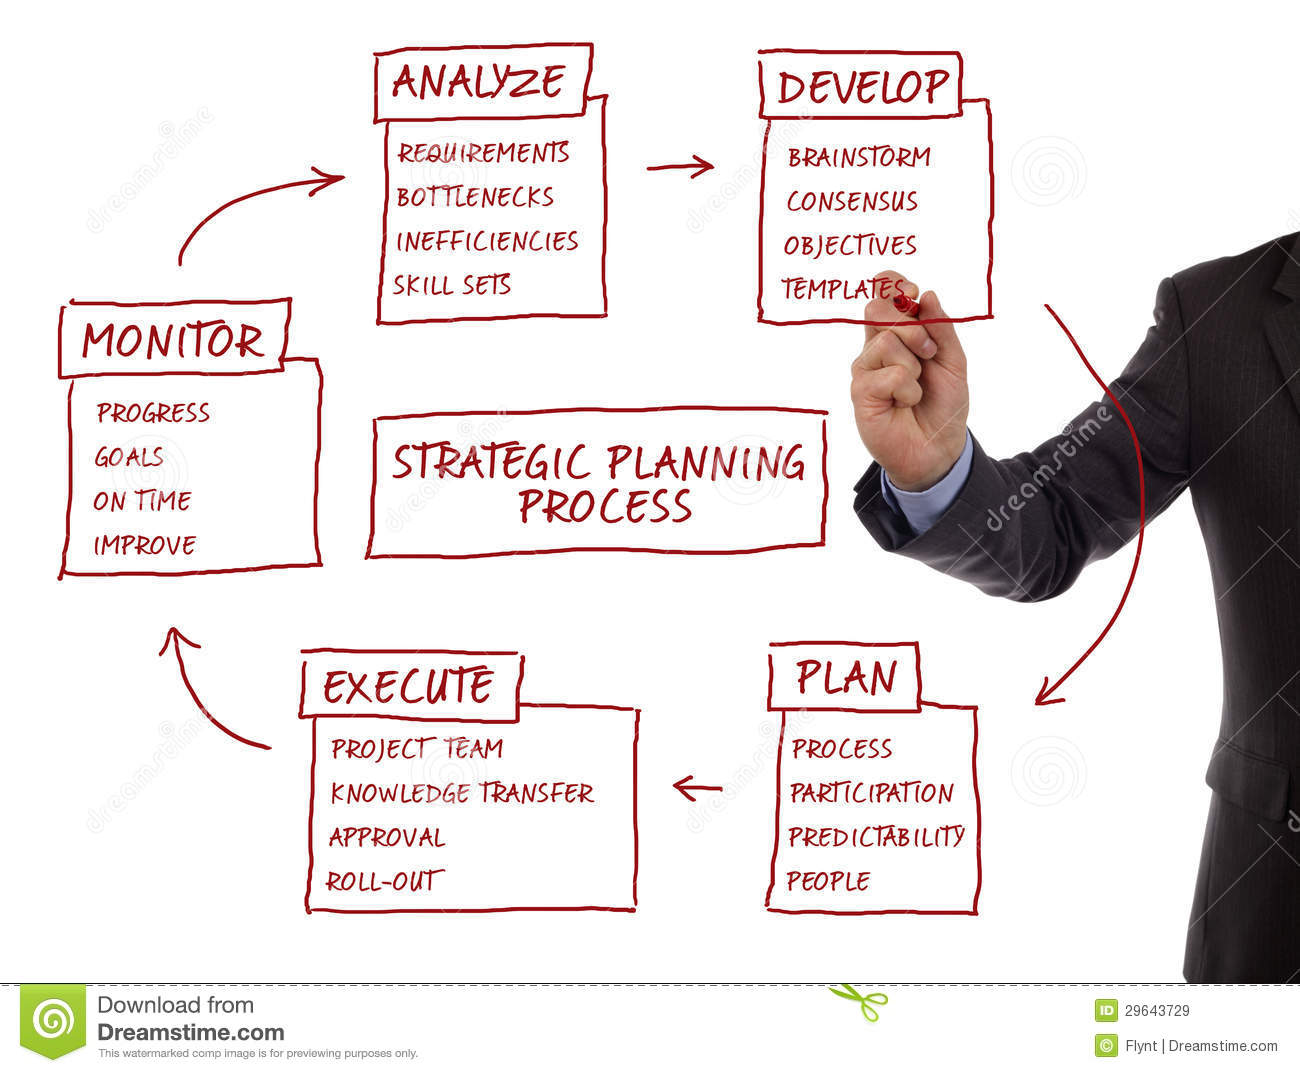 Strategic Planning Process Diagram Royalty Free Stock Images   Image